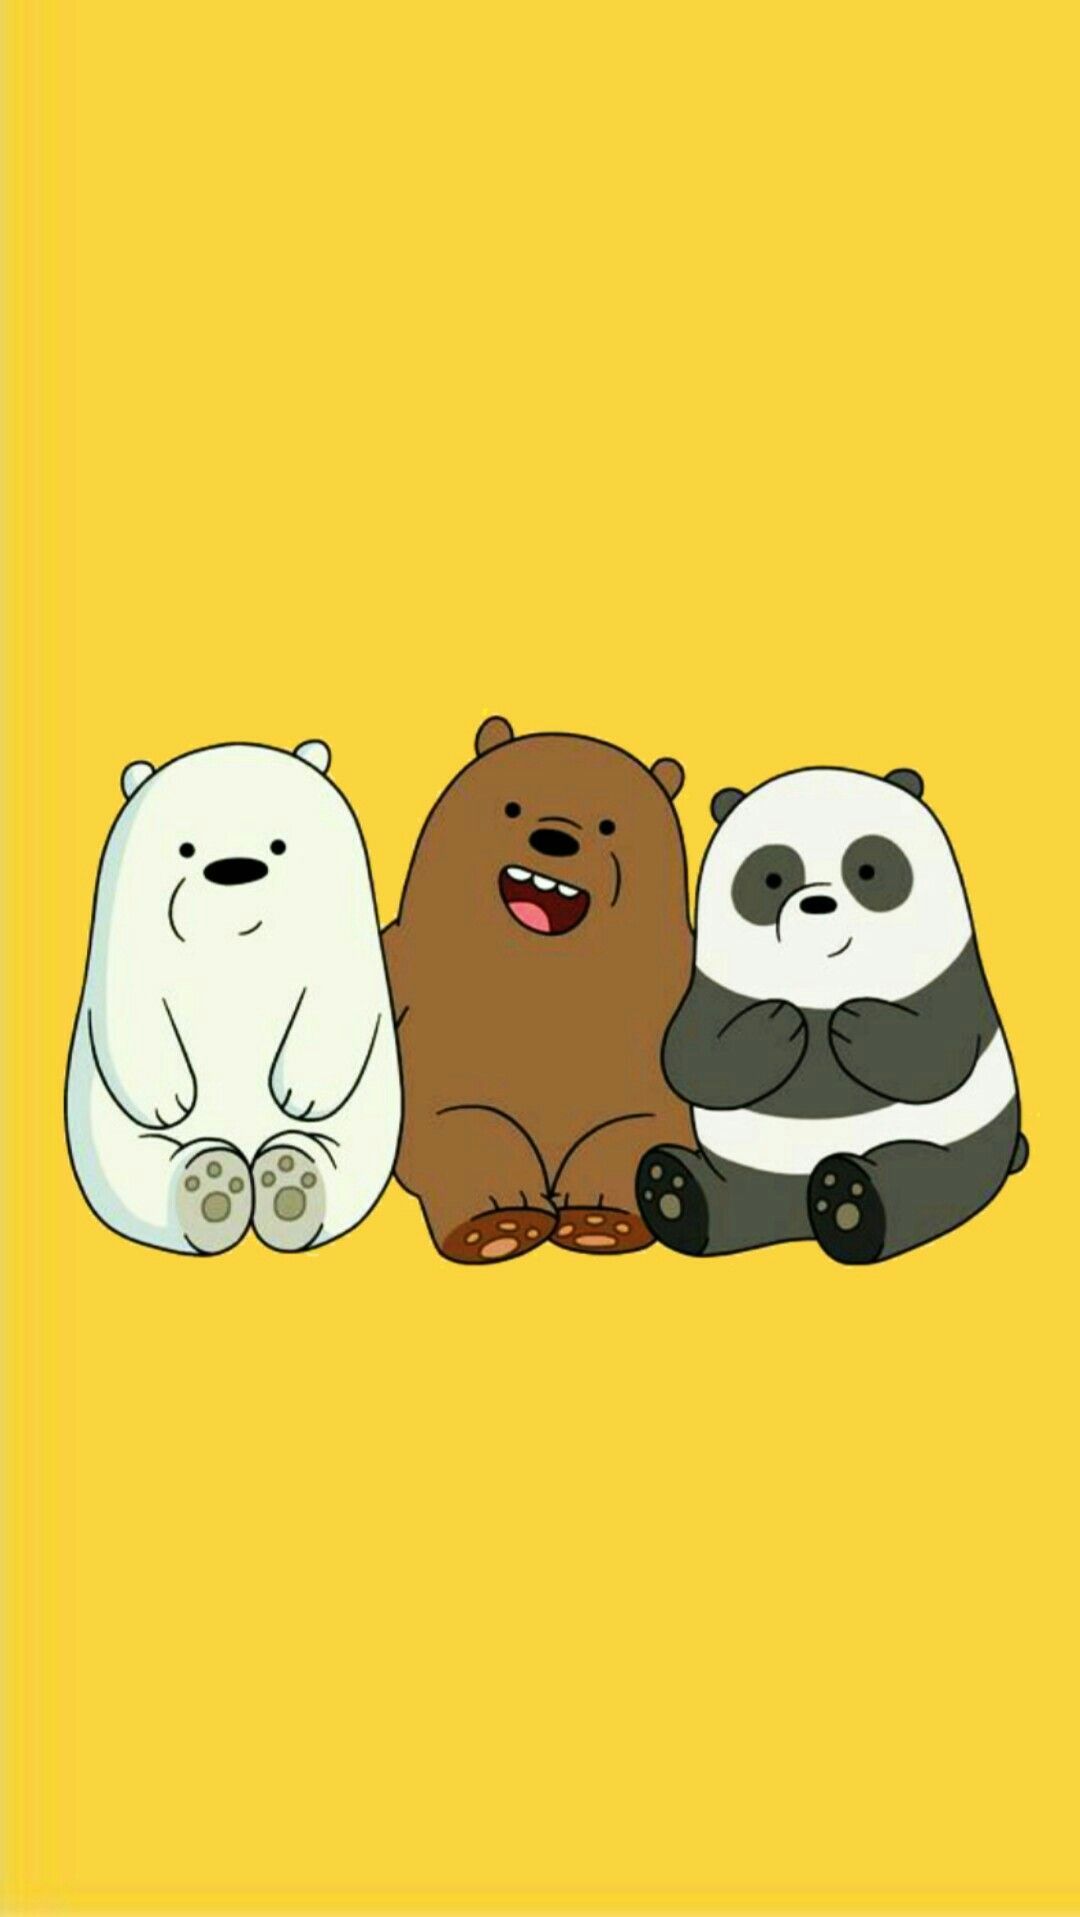 We Bare Bears Wallpaper, characters, games, baby bears episodes di